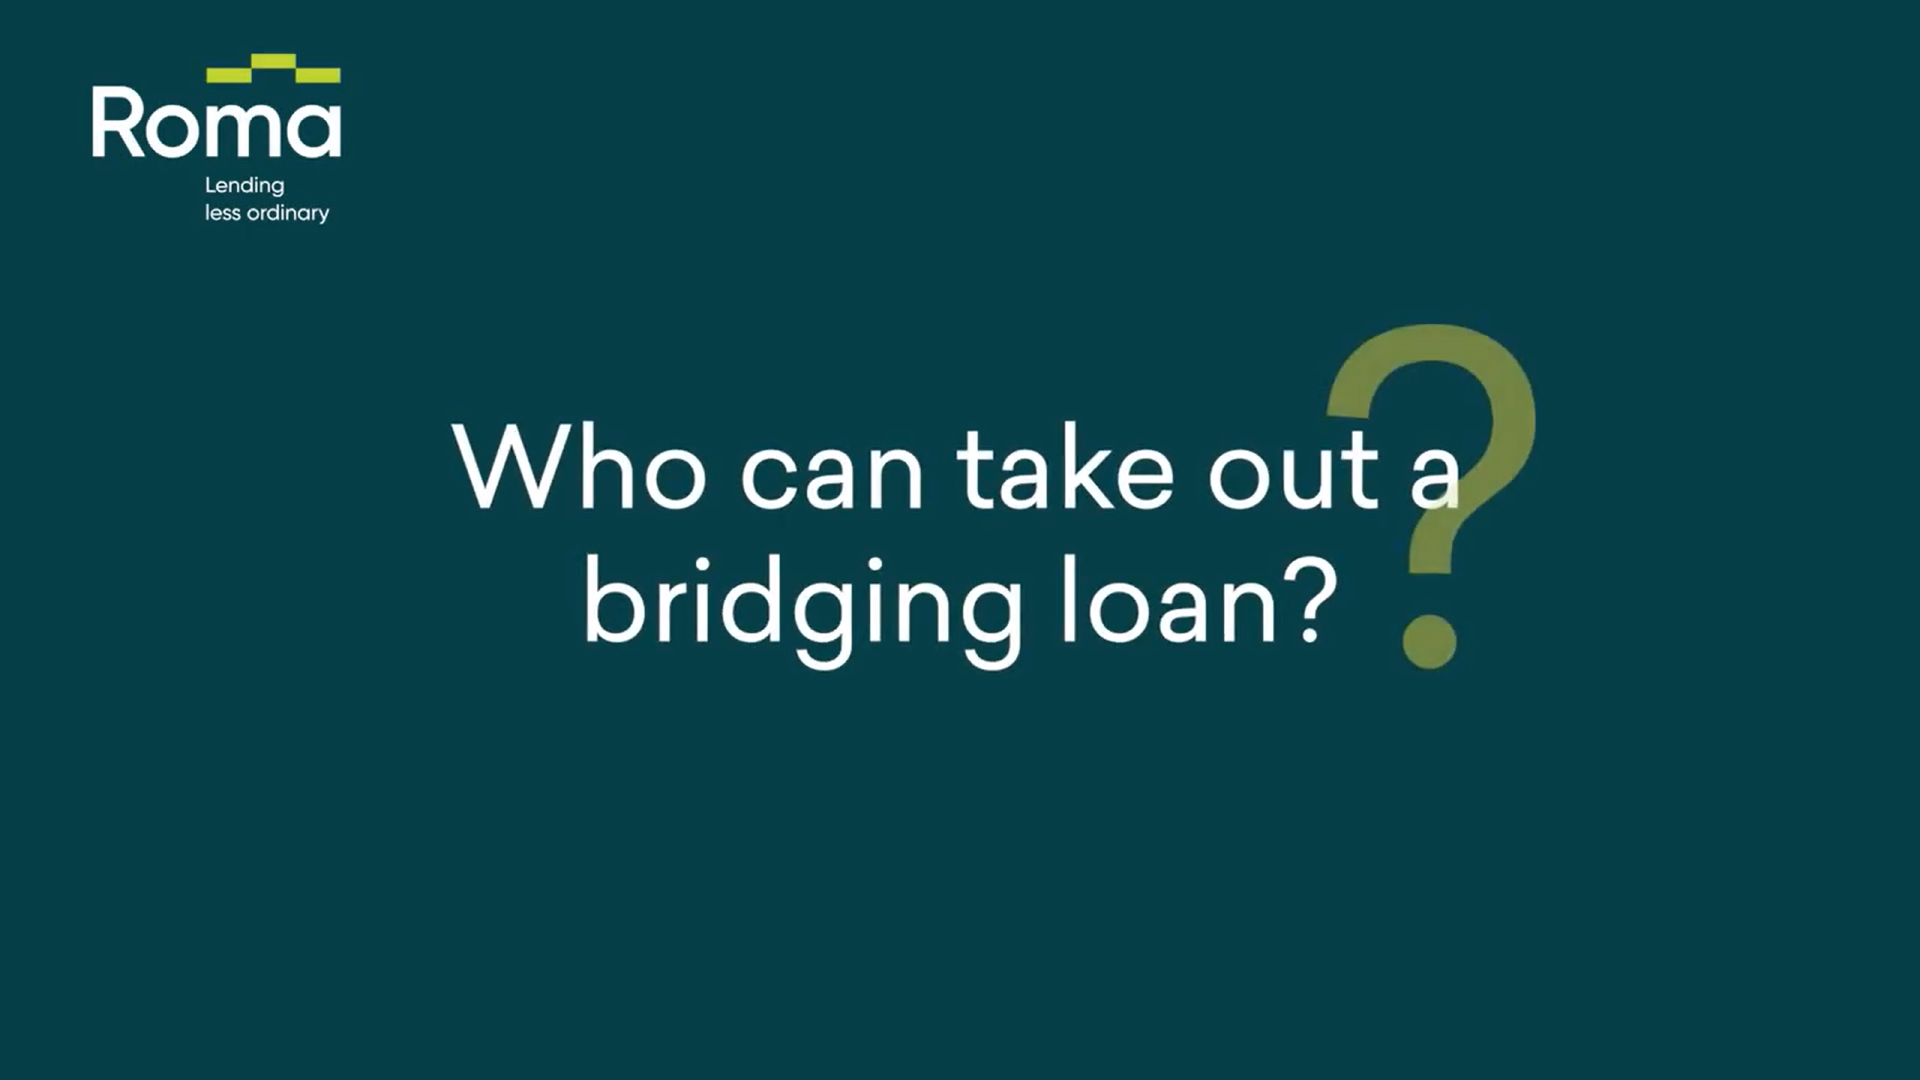 https://romafinance.co.uk/wp-content/uploads/2022/06/Who-can-take-out-a-bridging-loan.png